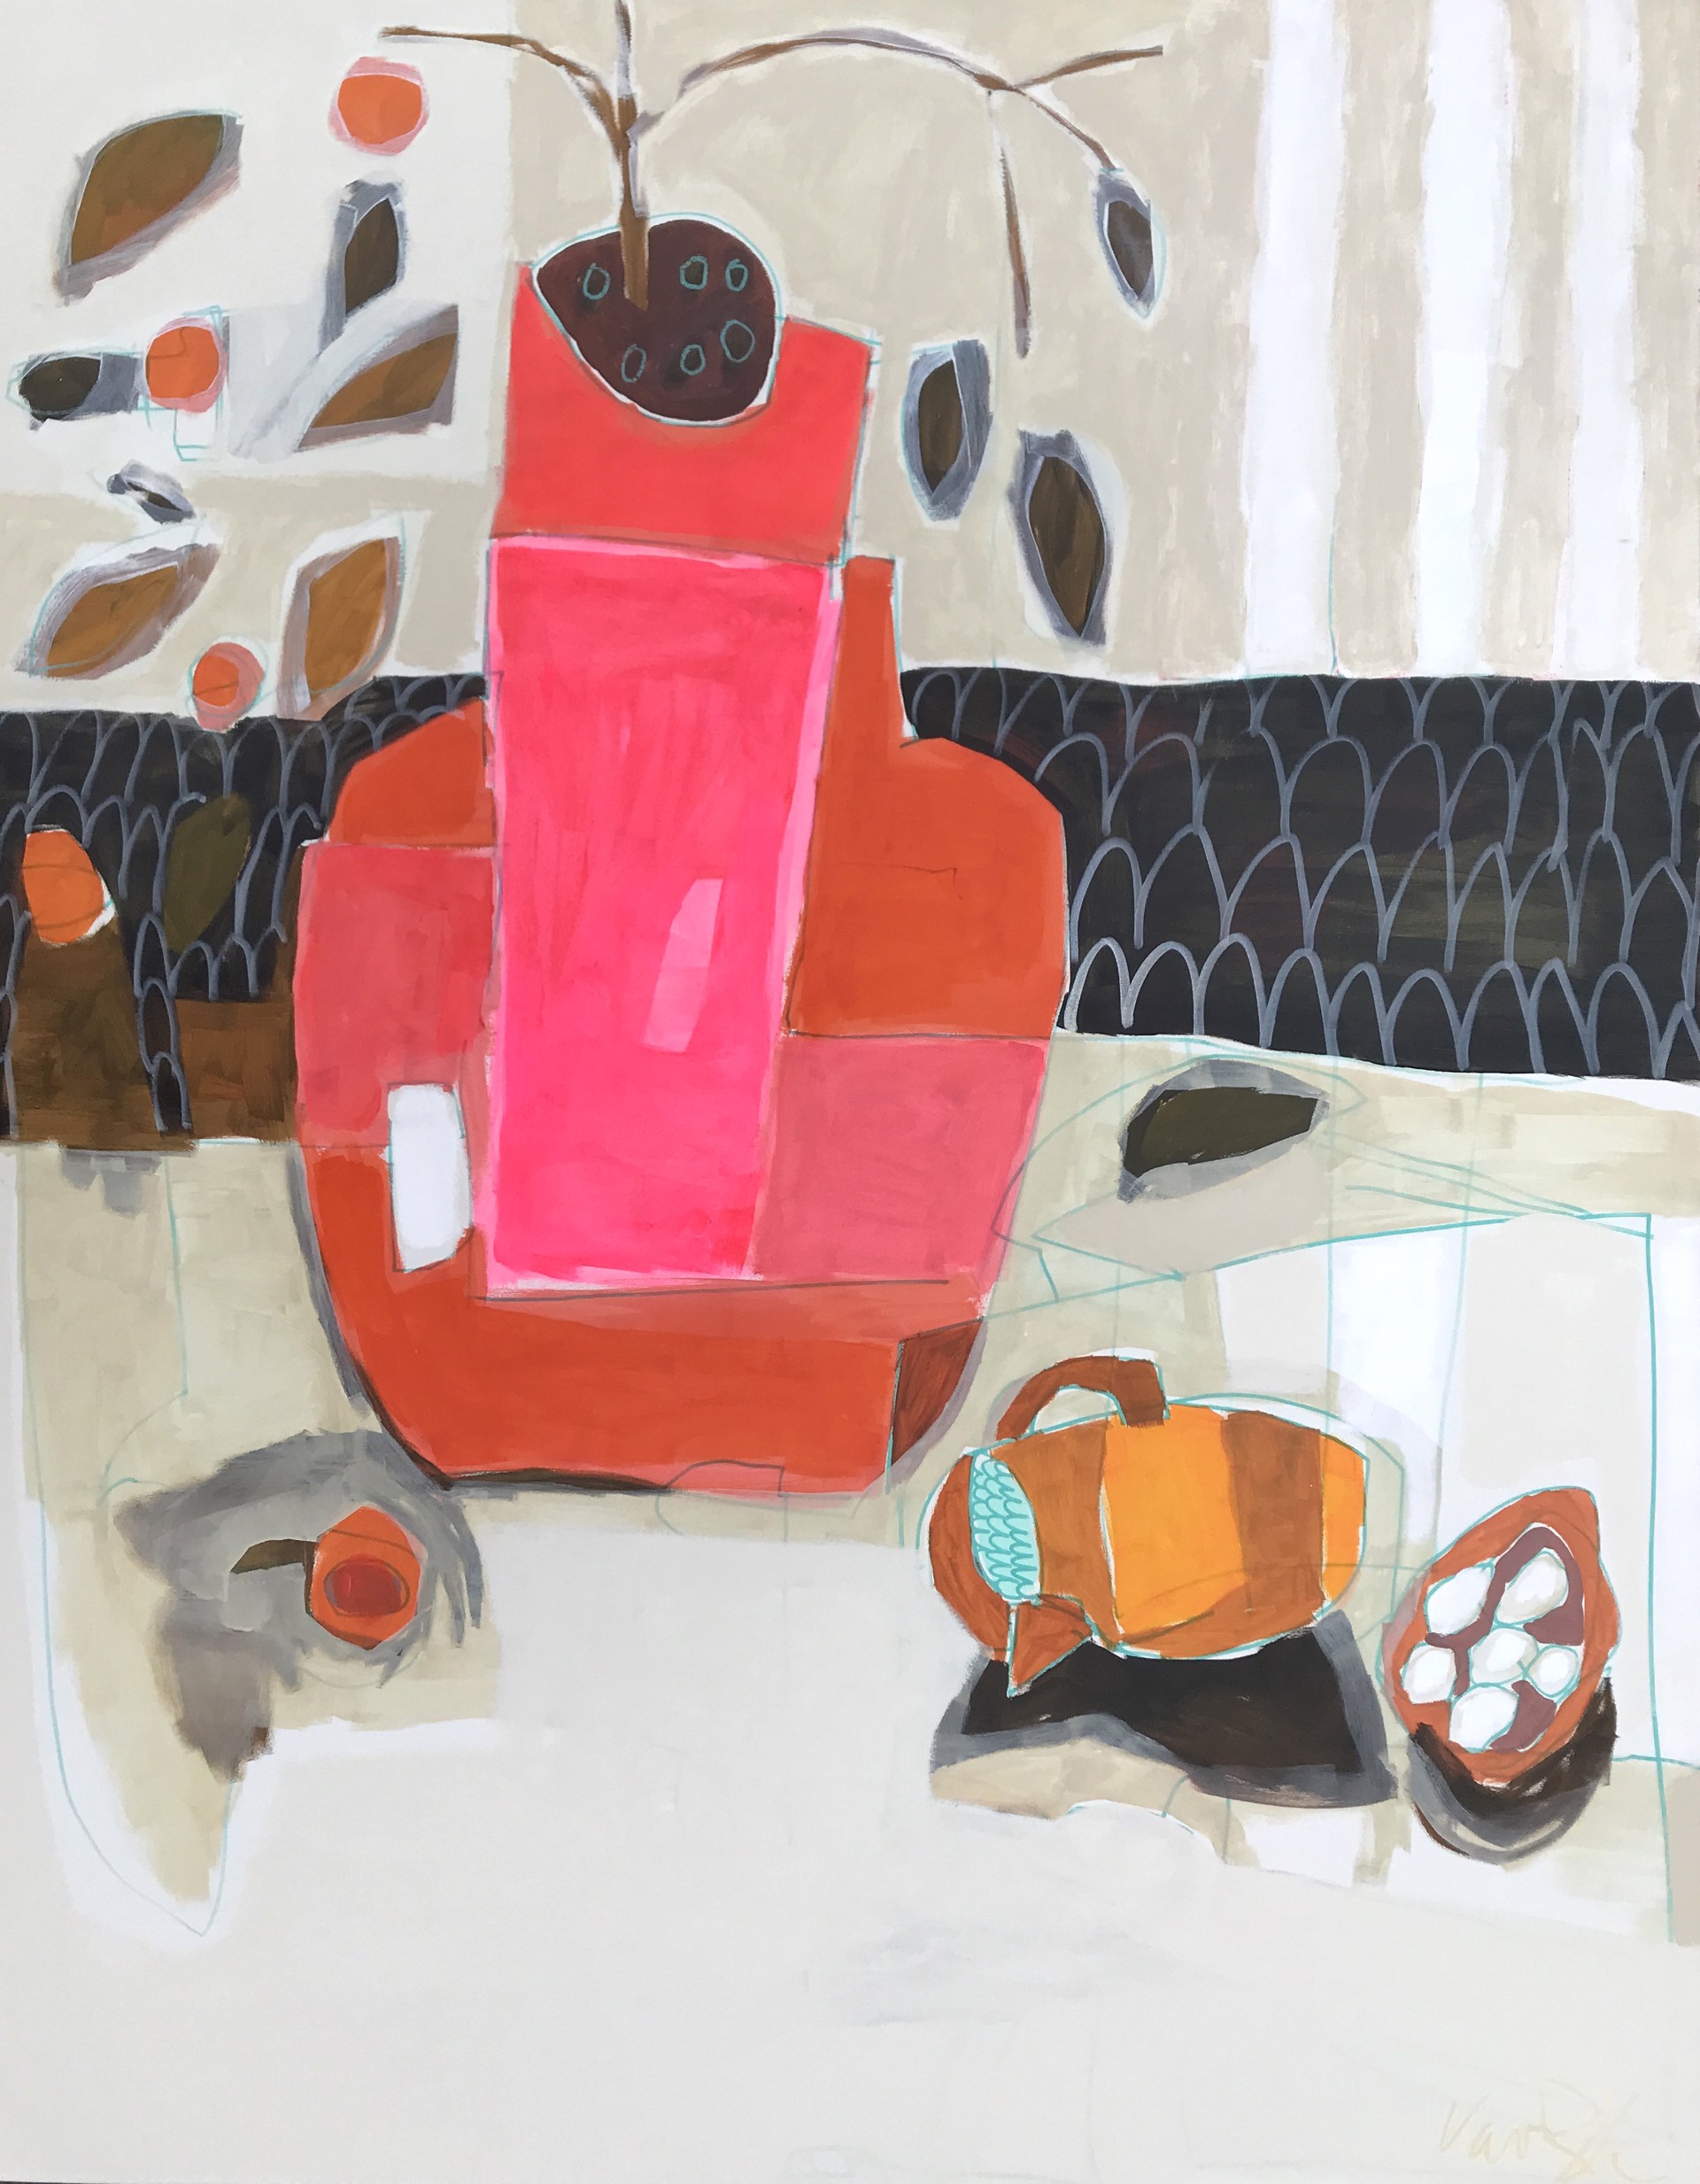 Mandarin Tree, Overturned Pitcher and Eggs on Table by Rachael Van Dyke